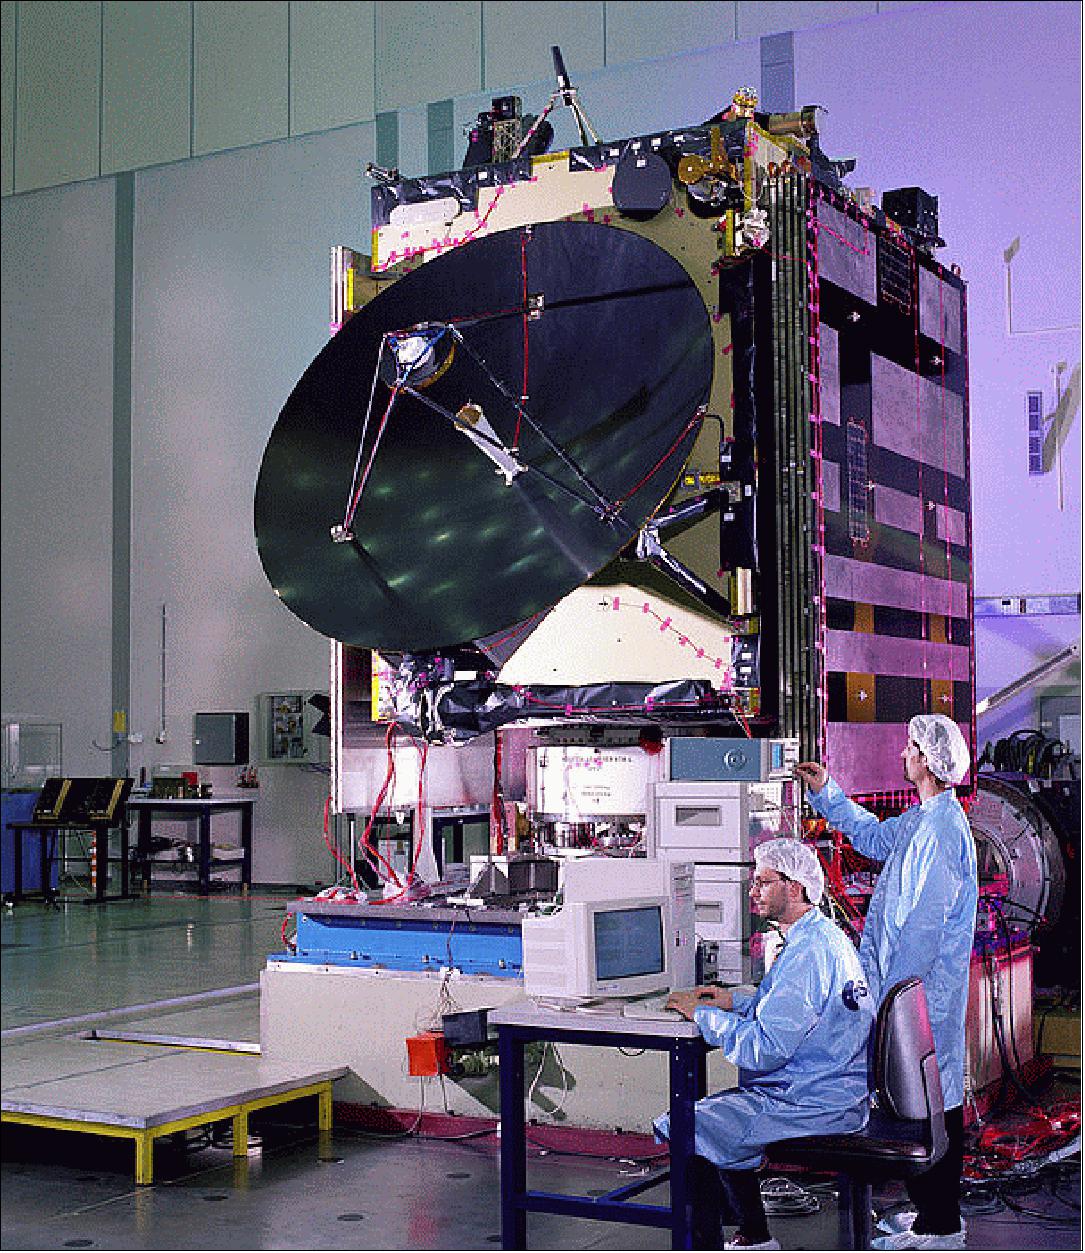 Figure 7: Photo of the Rosetta spacecraft with thermal blankets, released on January 19, 2004, ready for testing in the Large Space Simulator, at ESA/ESTEC (image credit: ESA) 14)